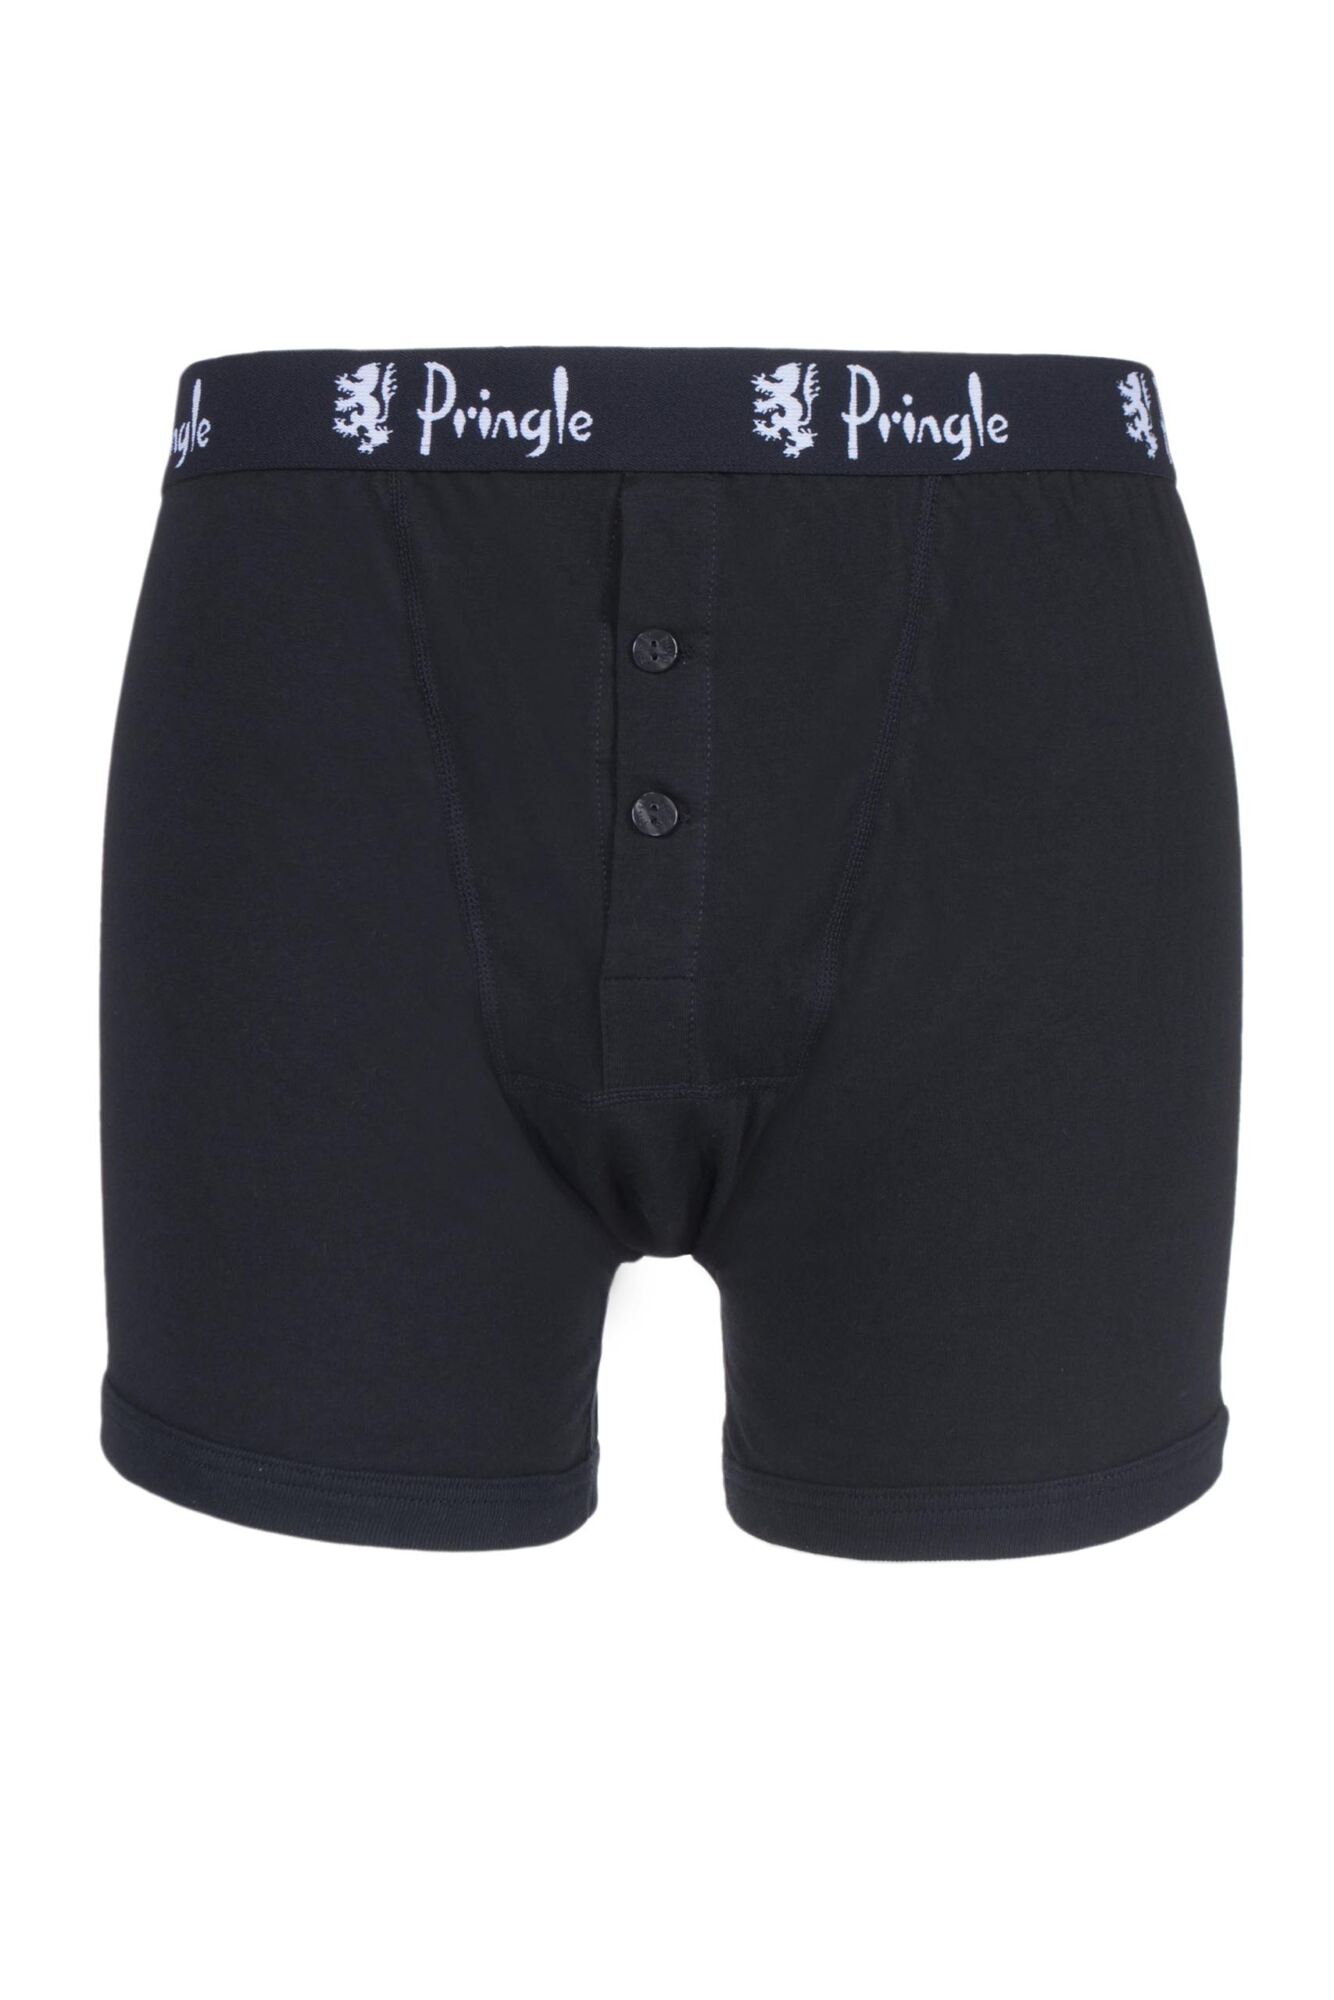 1 Pack Button Fly Cotton Fitted Boxer Shorts Men's - Pringle